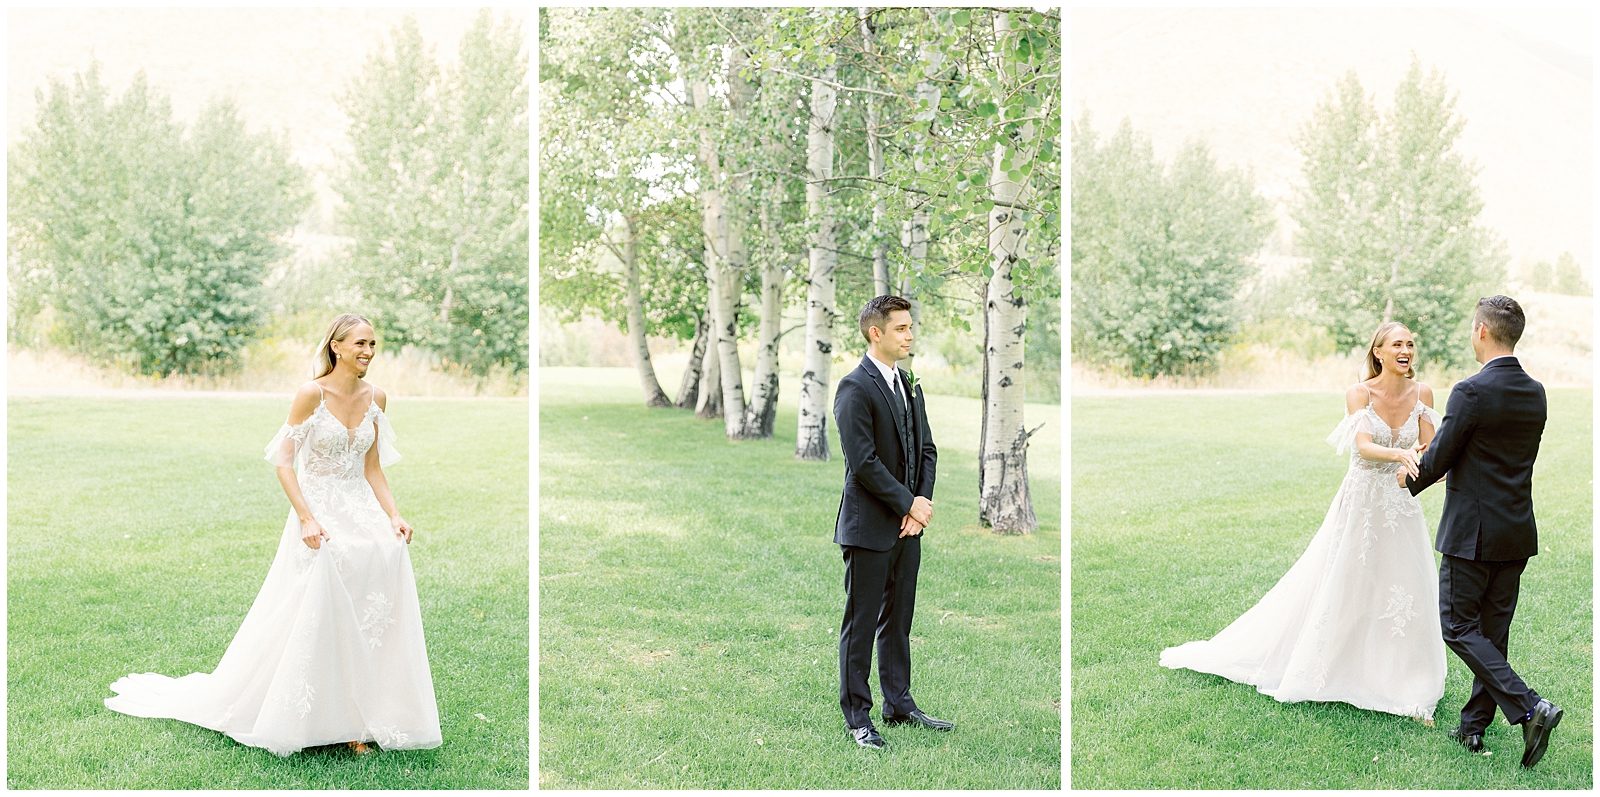 Trail Creek Cabin Wedding at Sun Valley Resort Bride and Groom First Look